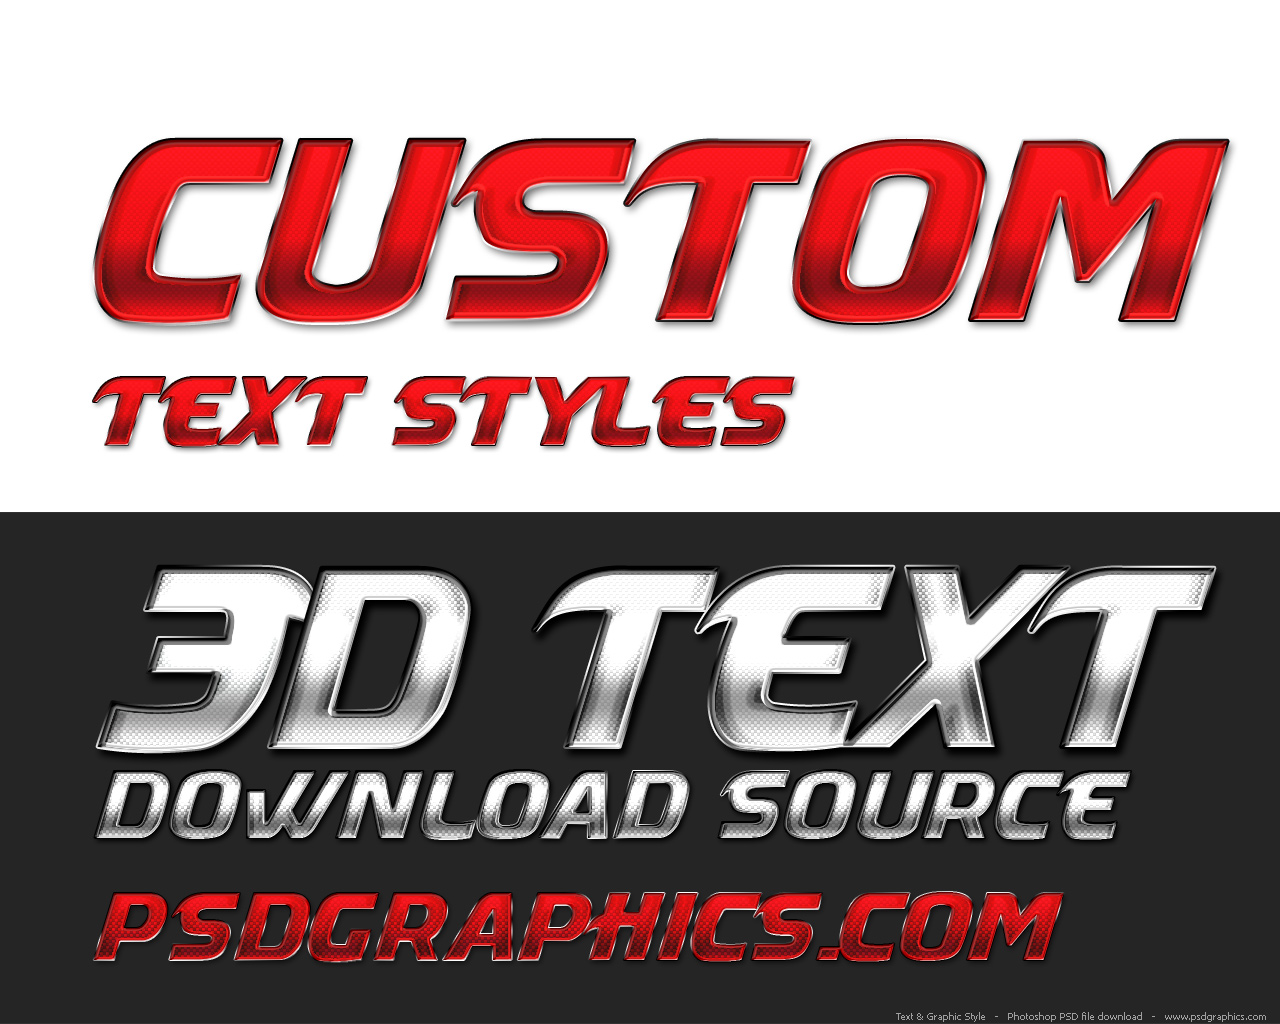 Graphic styles 2.0 download torrent